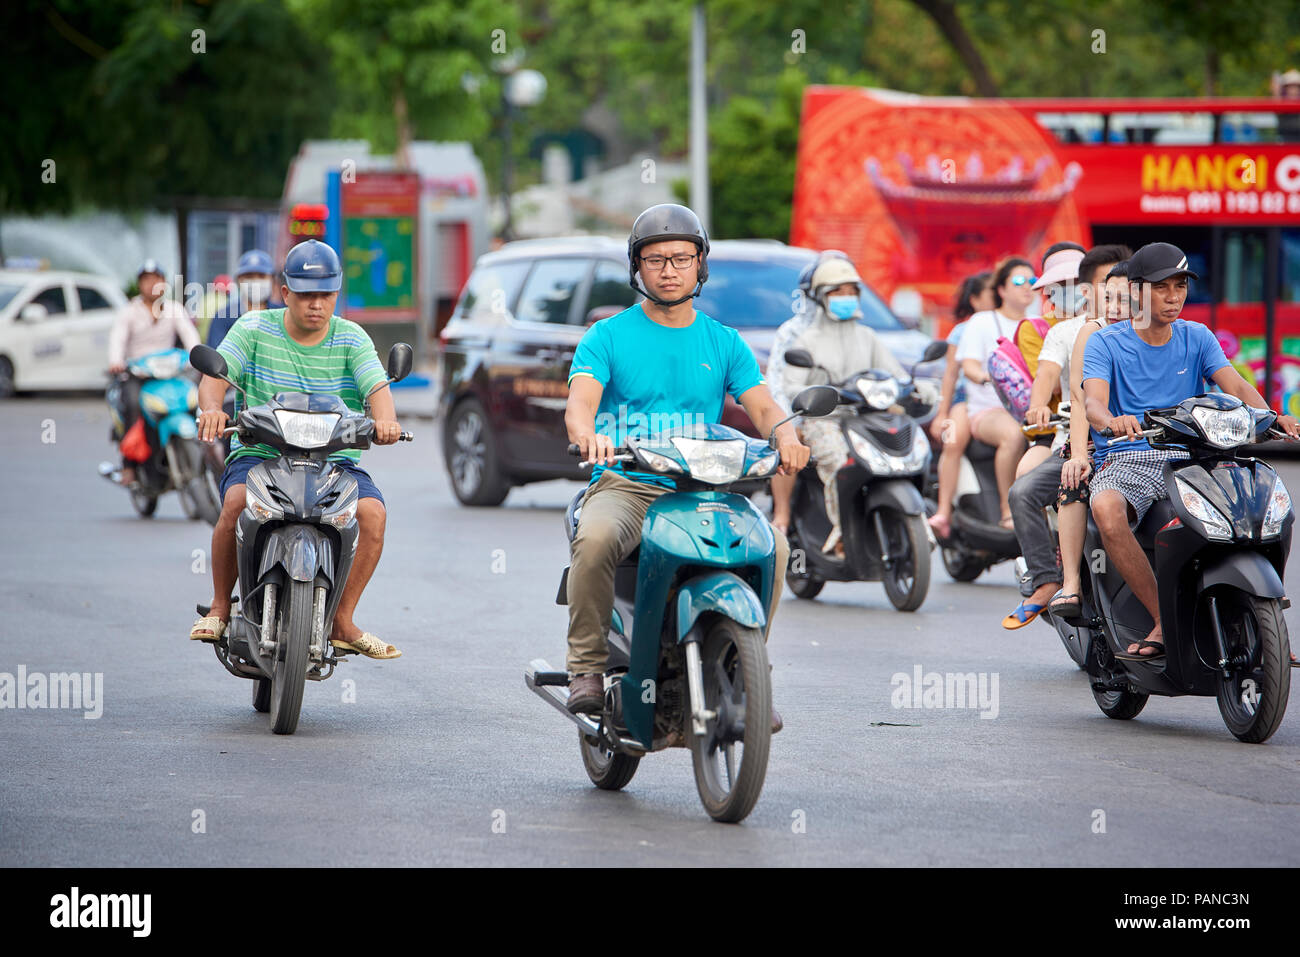 Moped riders in Hanoi, Vietnam. A ban on motorbikes and scooters has been set to 2030 by the city council and the department of transport. Stock Photo